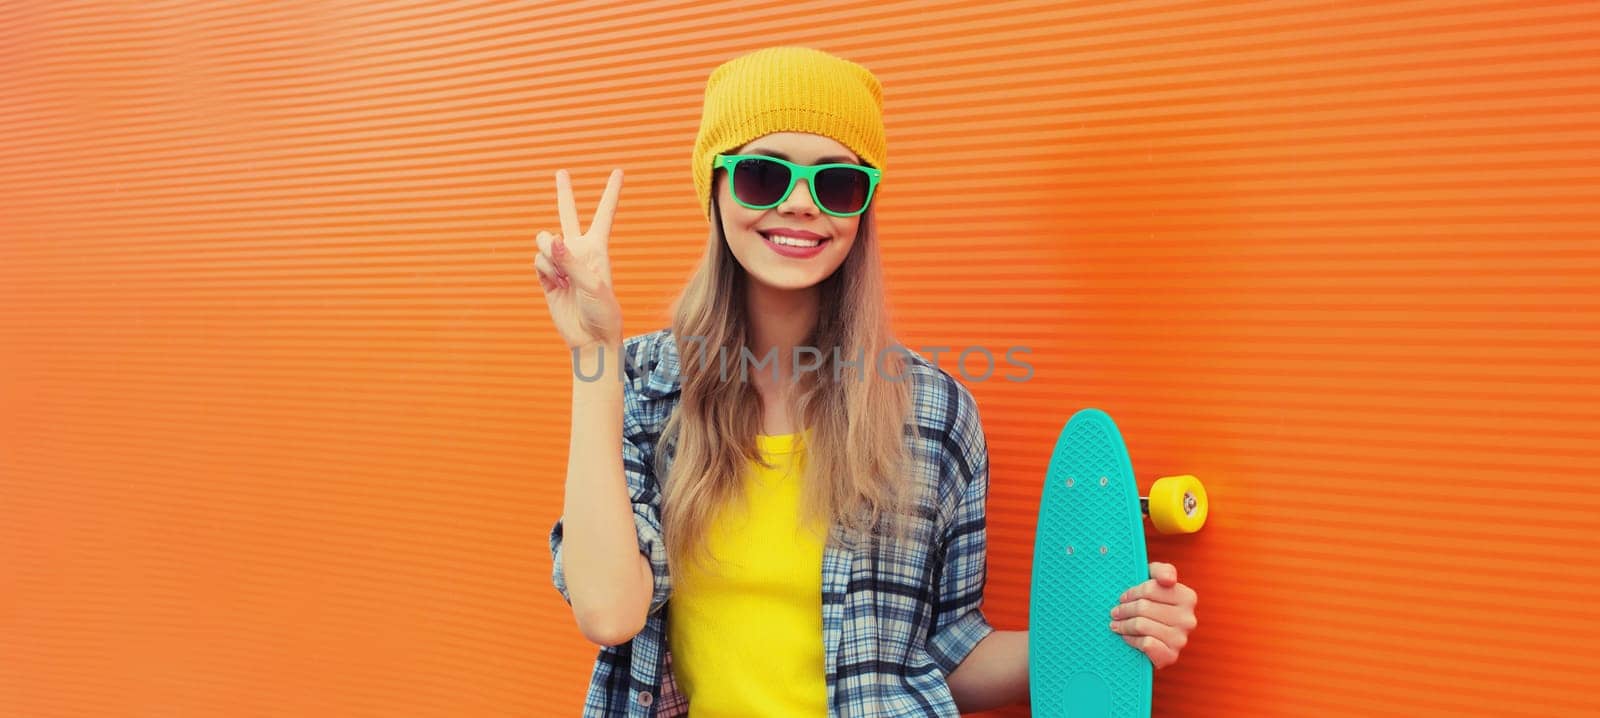 Summer portrait of happy cheerful stylish young woman with skateboard posing on orange background by Rohappy